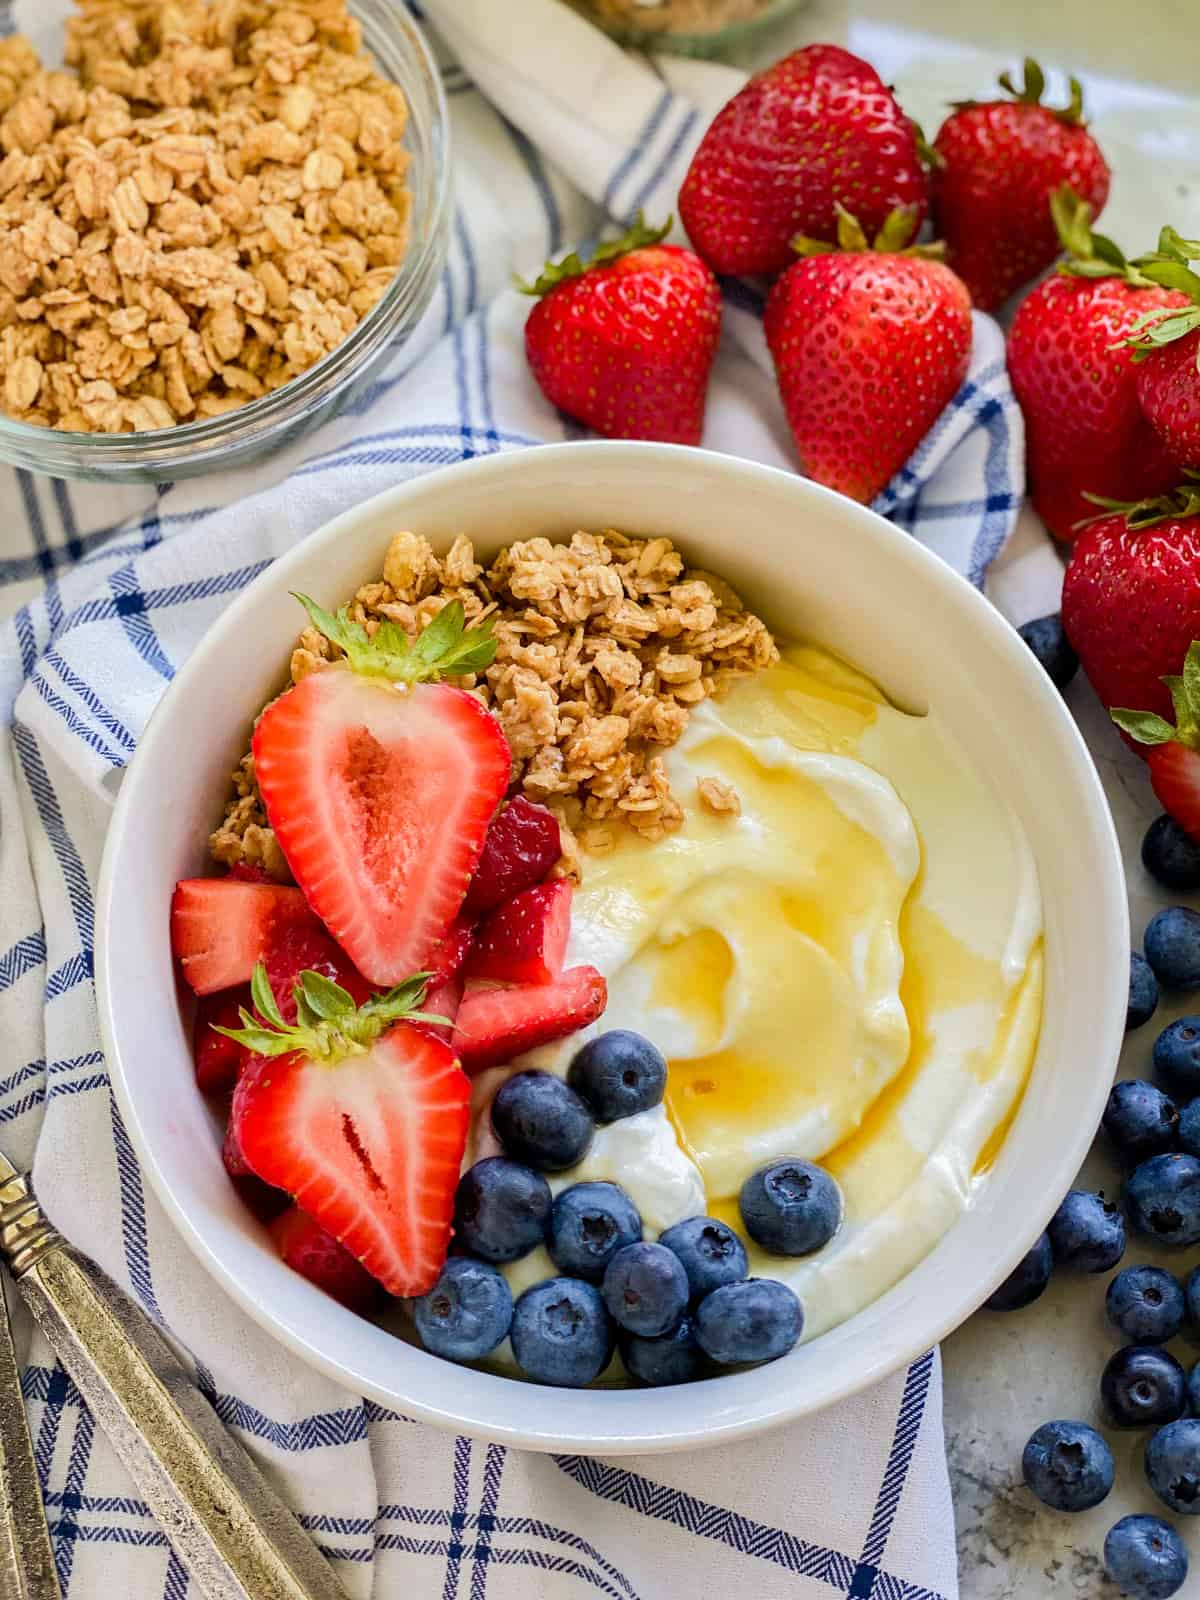 White bowl filled with yogurt, fruit and granola on a stripped napkin.